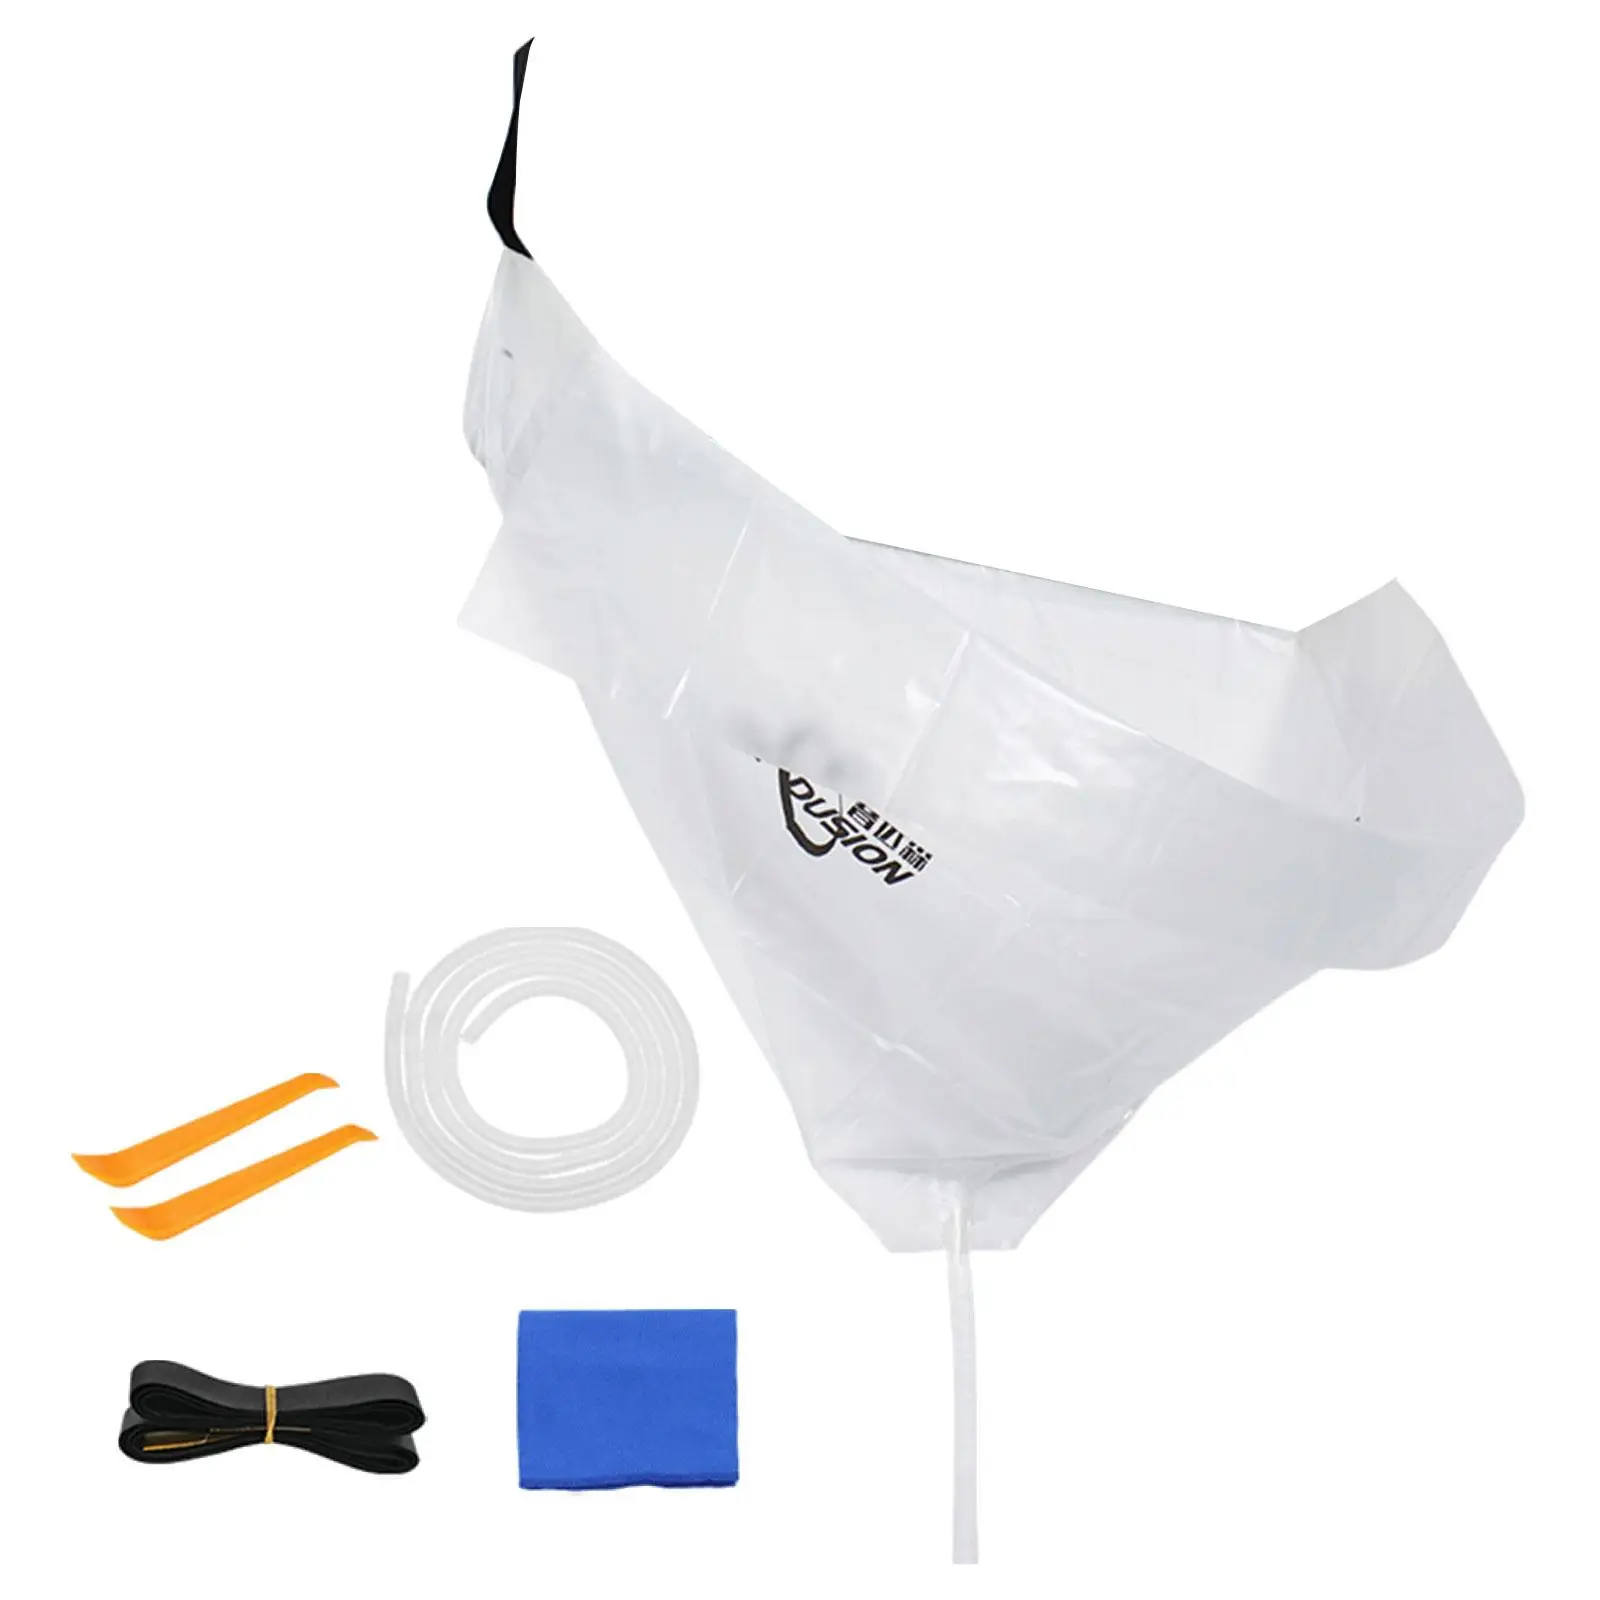 Air Conditioning Cleaning Cover Bag with Water Pipe Upgrade Drain Outlet Air Conditioner Wash Service Bag for Hotel Shop